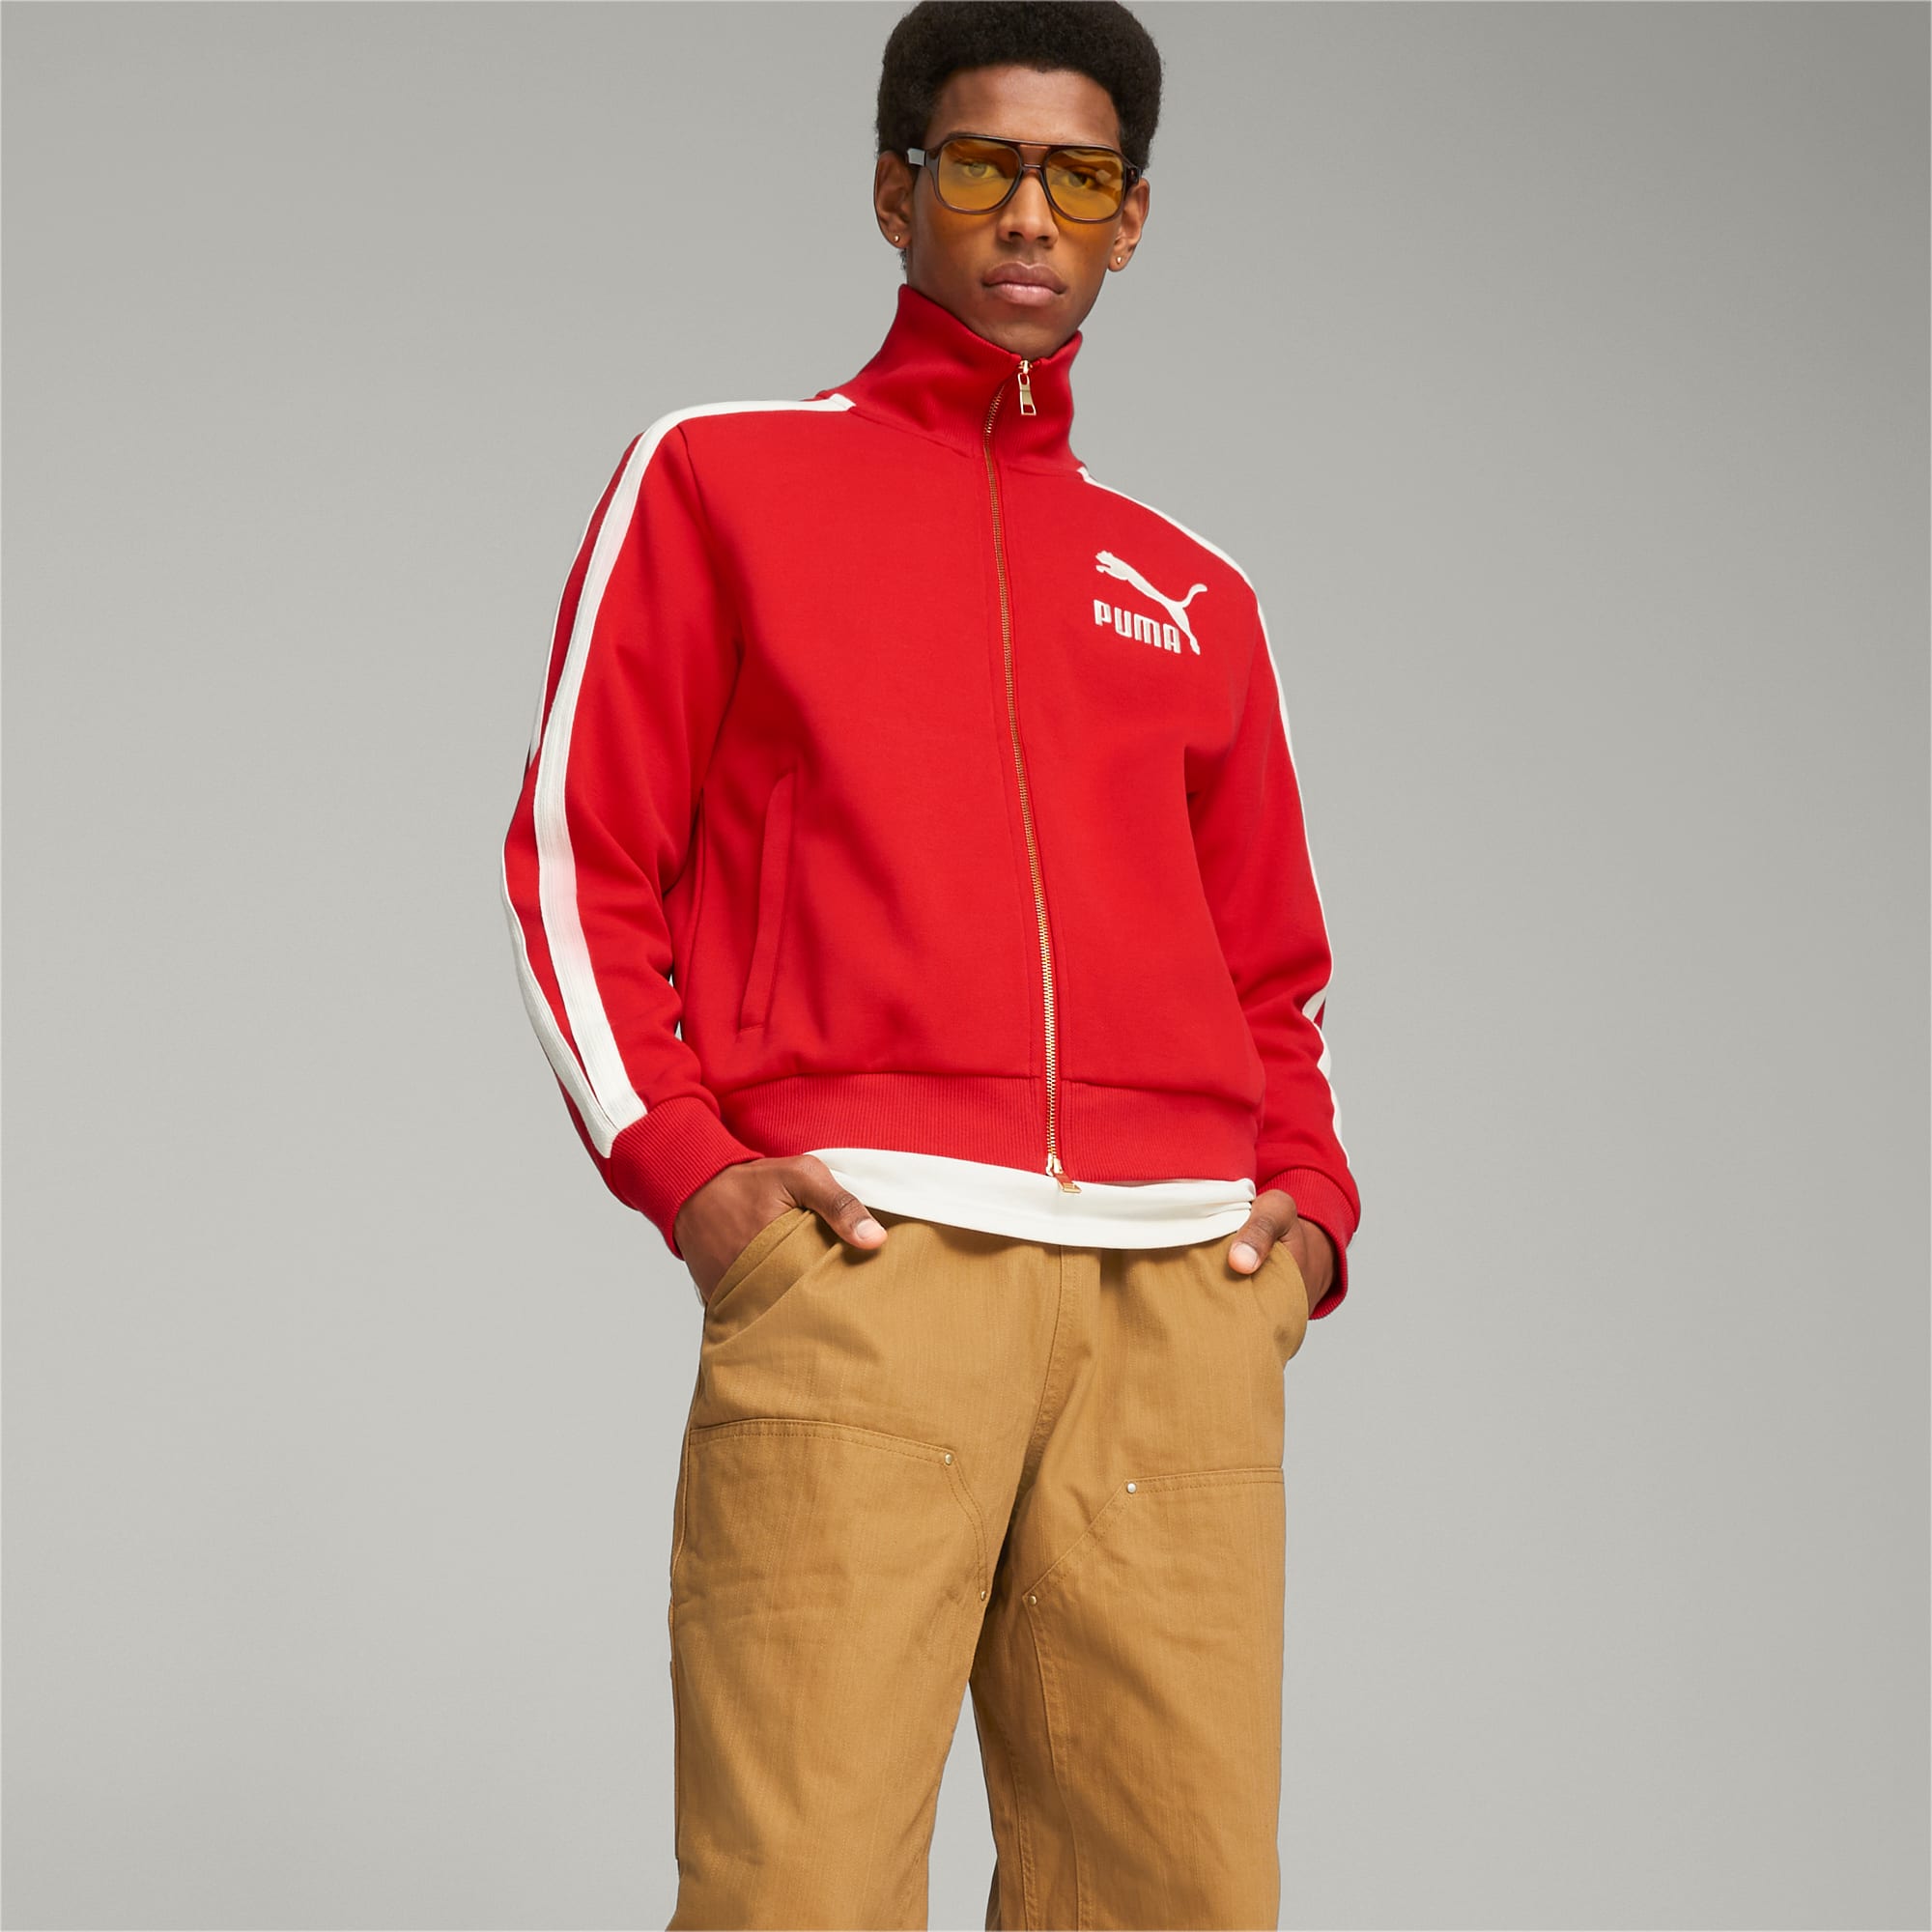 PUMA X Rhuigi T7 Track Top Men's Jacket, For All Time Red, Size XS, Clothing